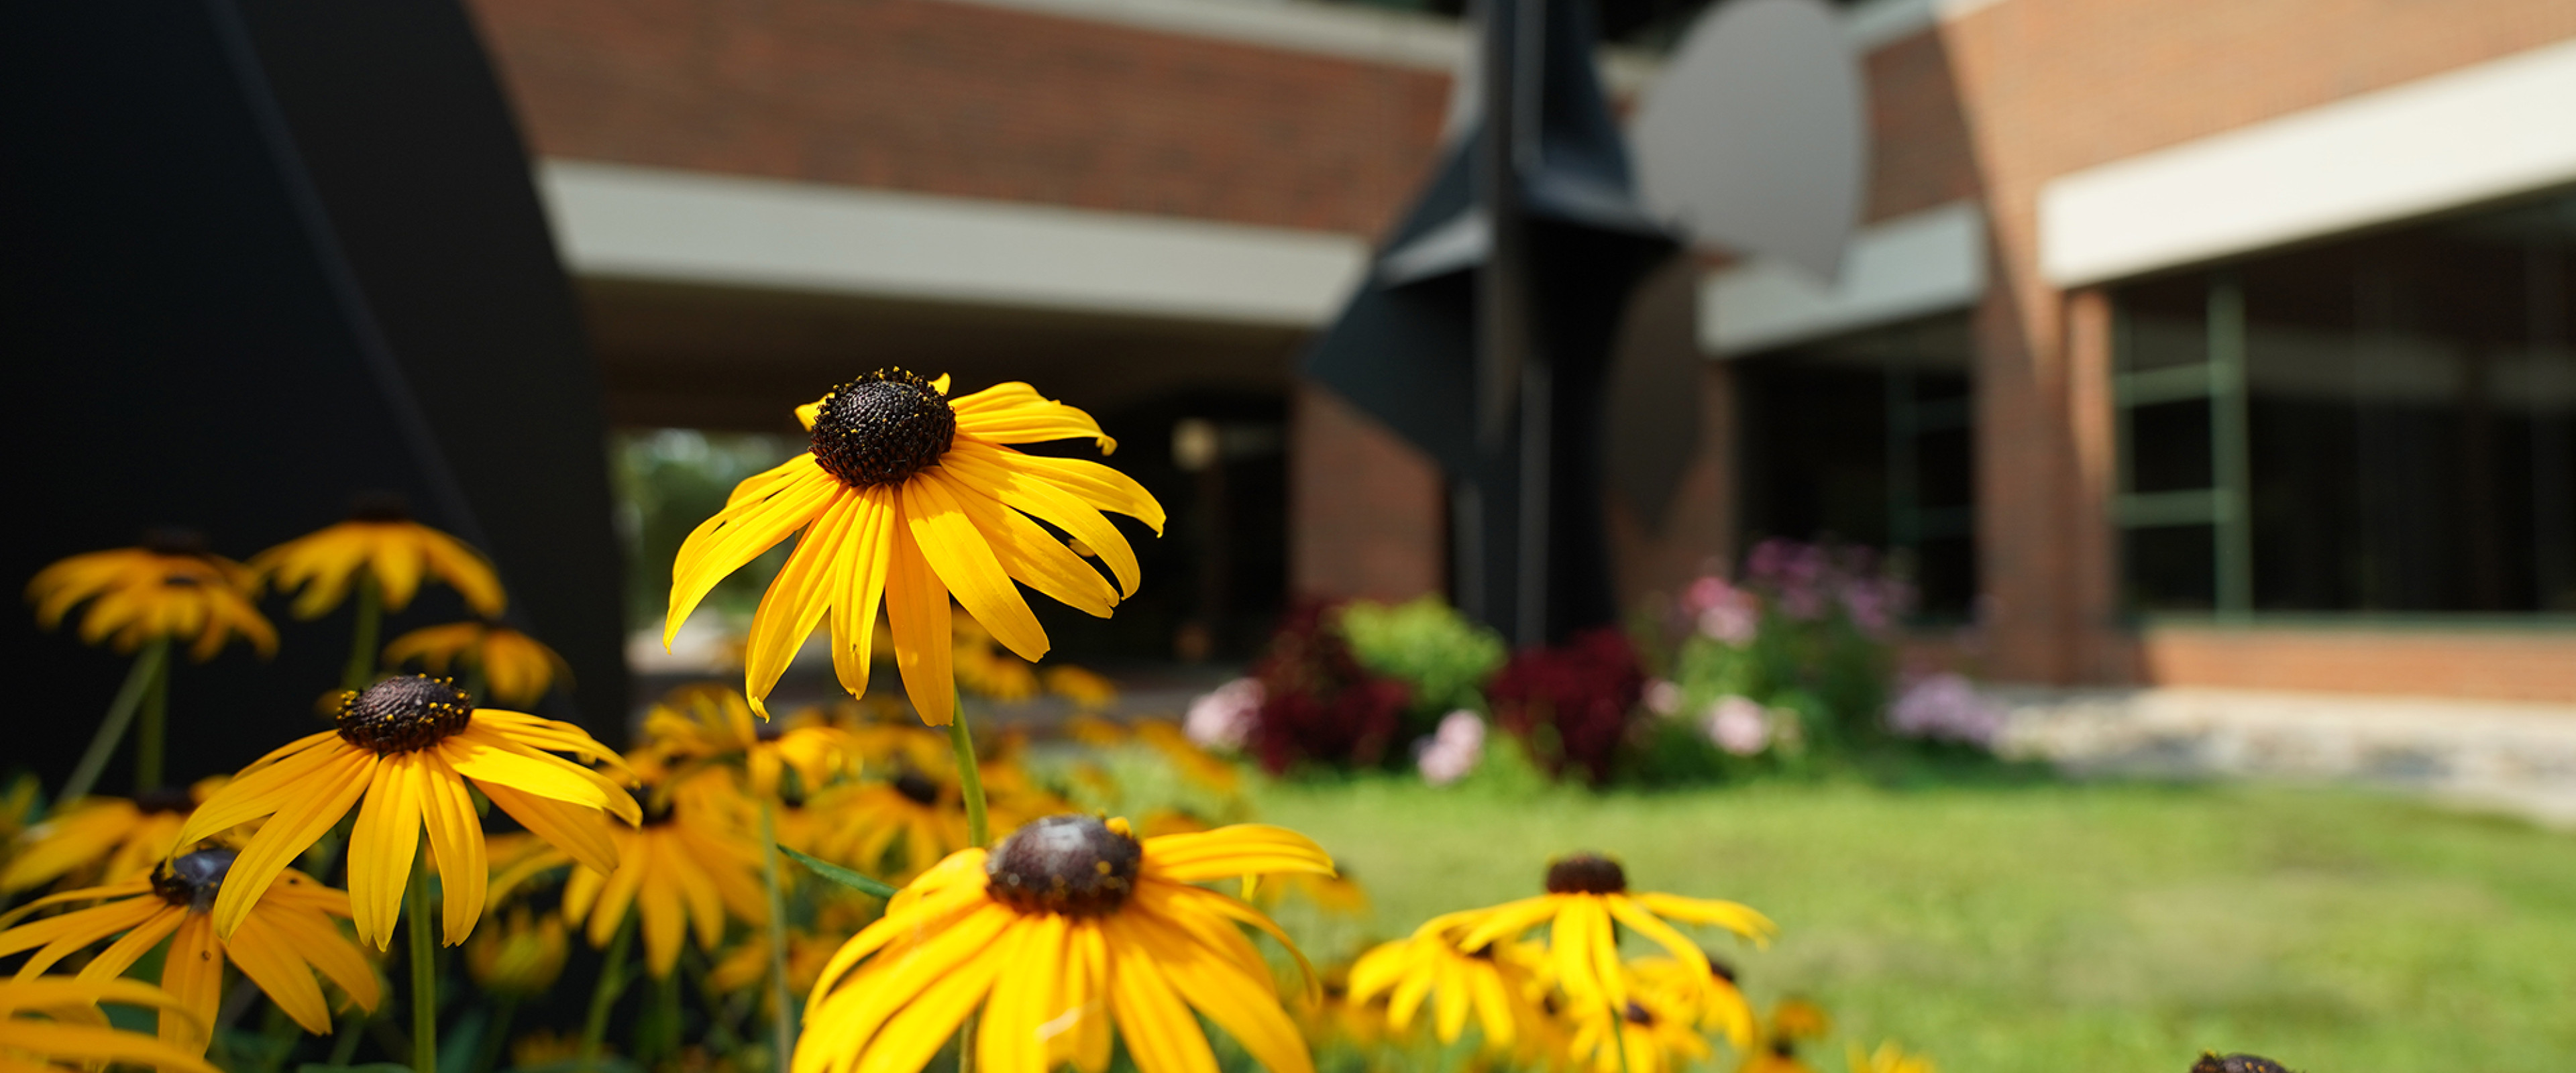 Black-eyed Susans are blooming outside the Haworth College of Business